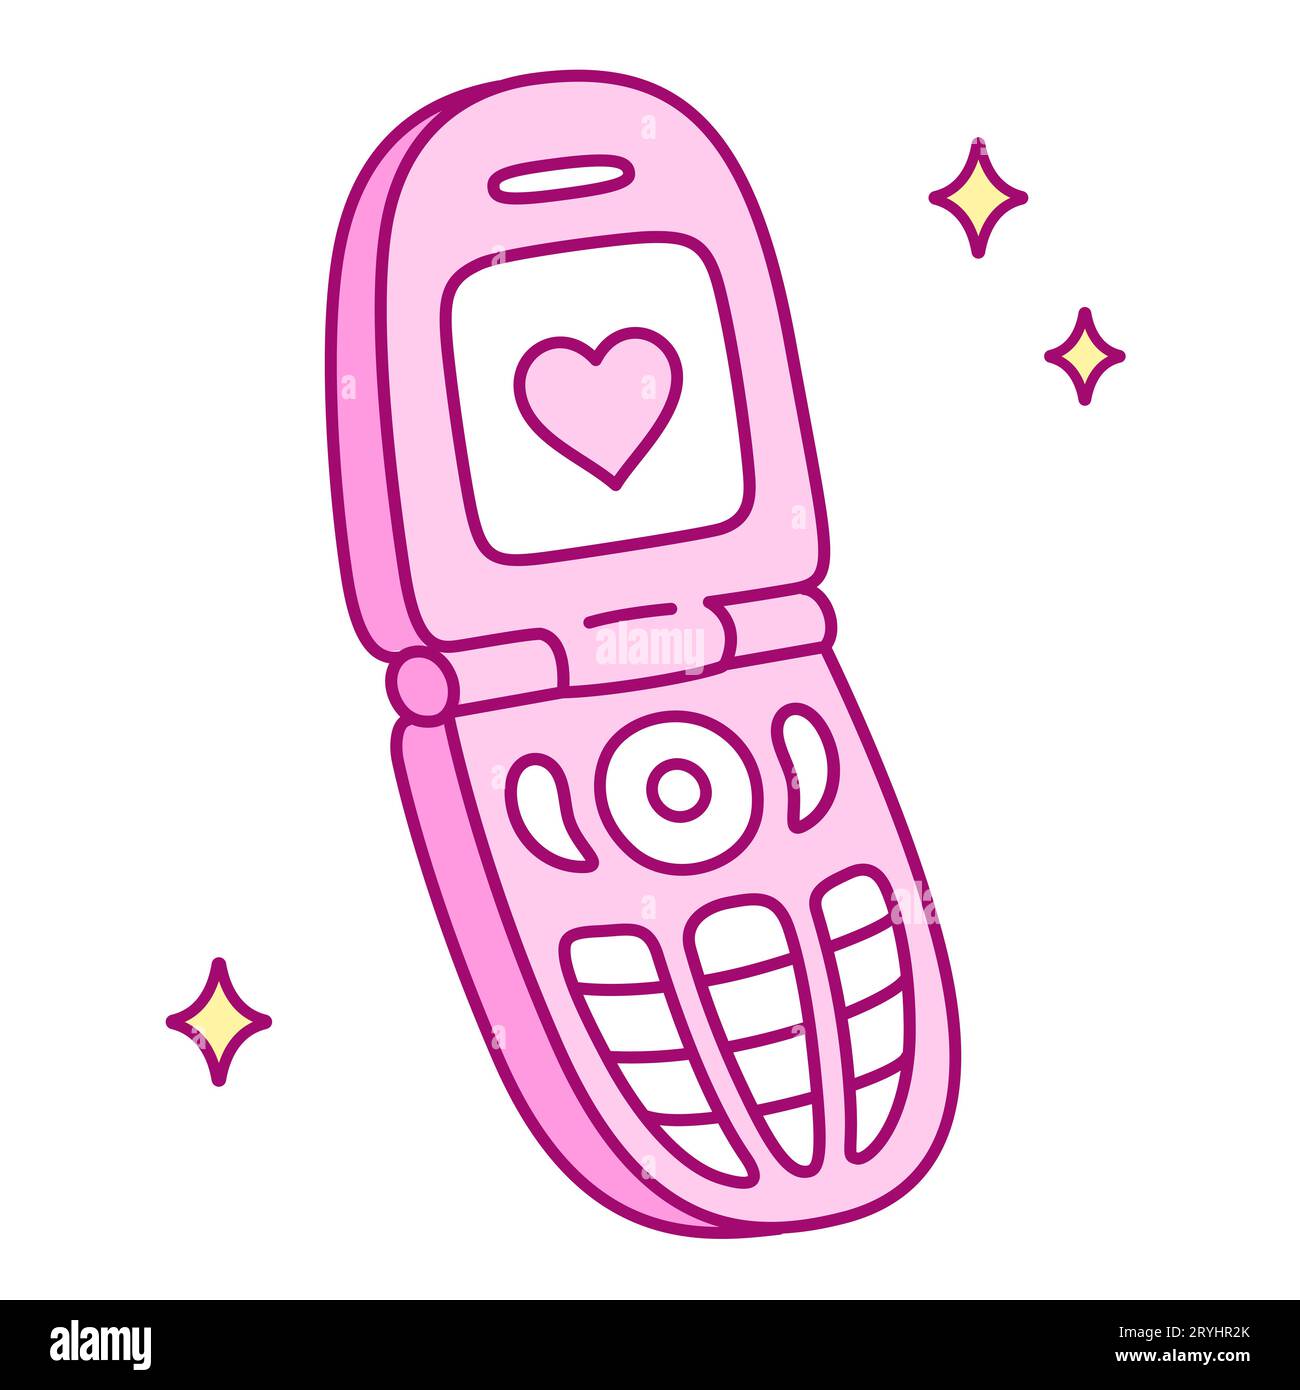 Pink flip phone Stock Vector Images - Alamy